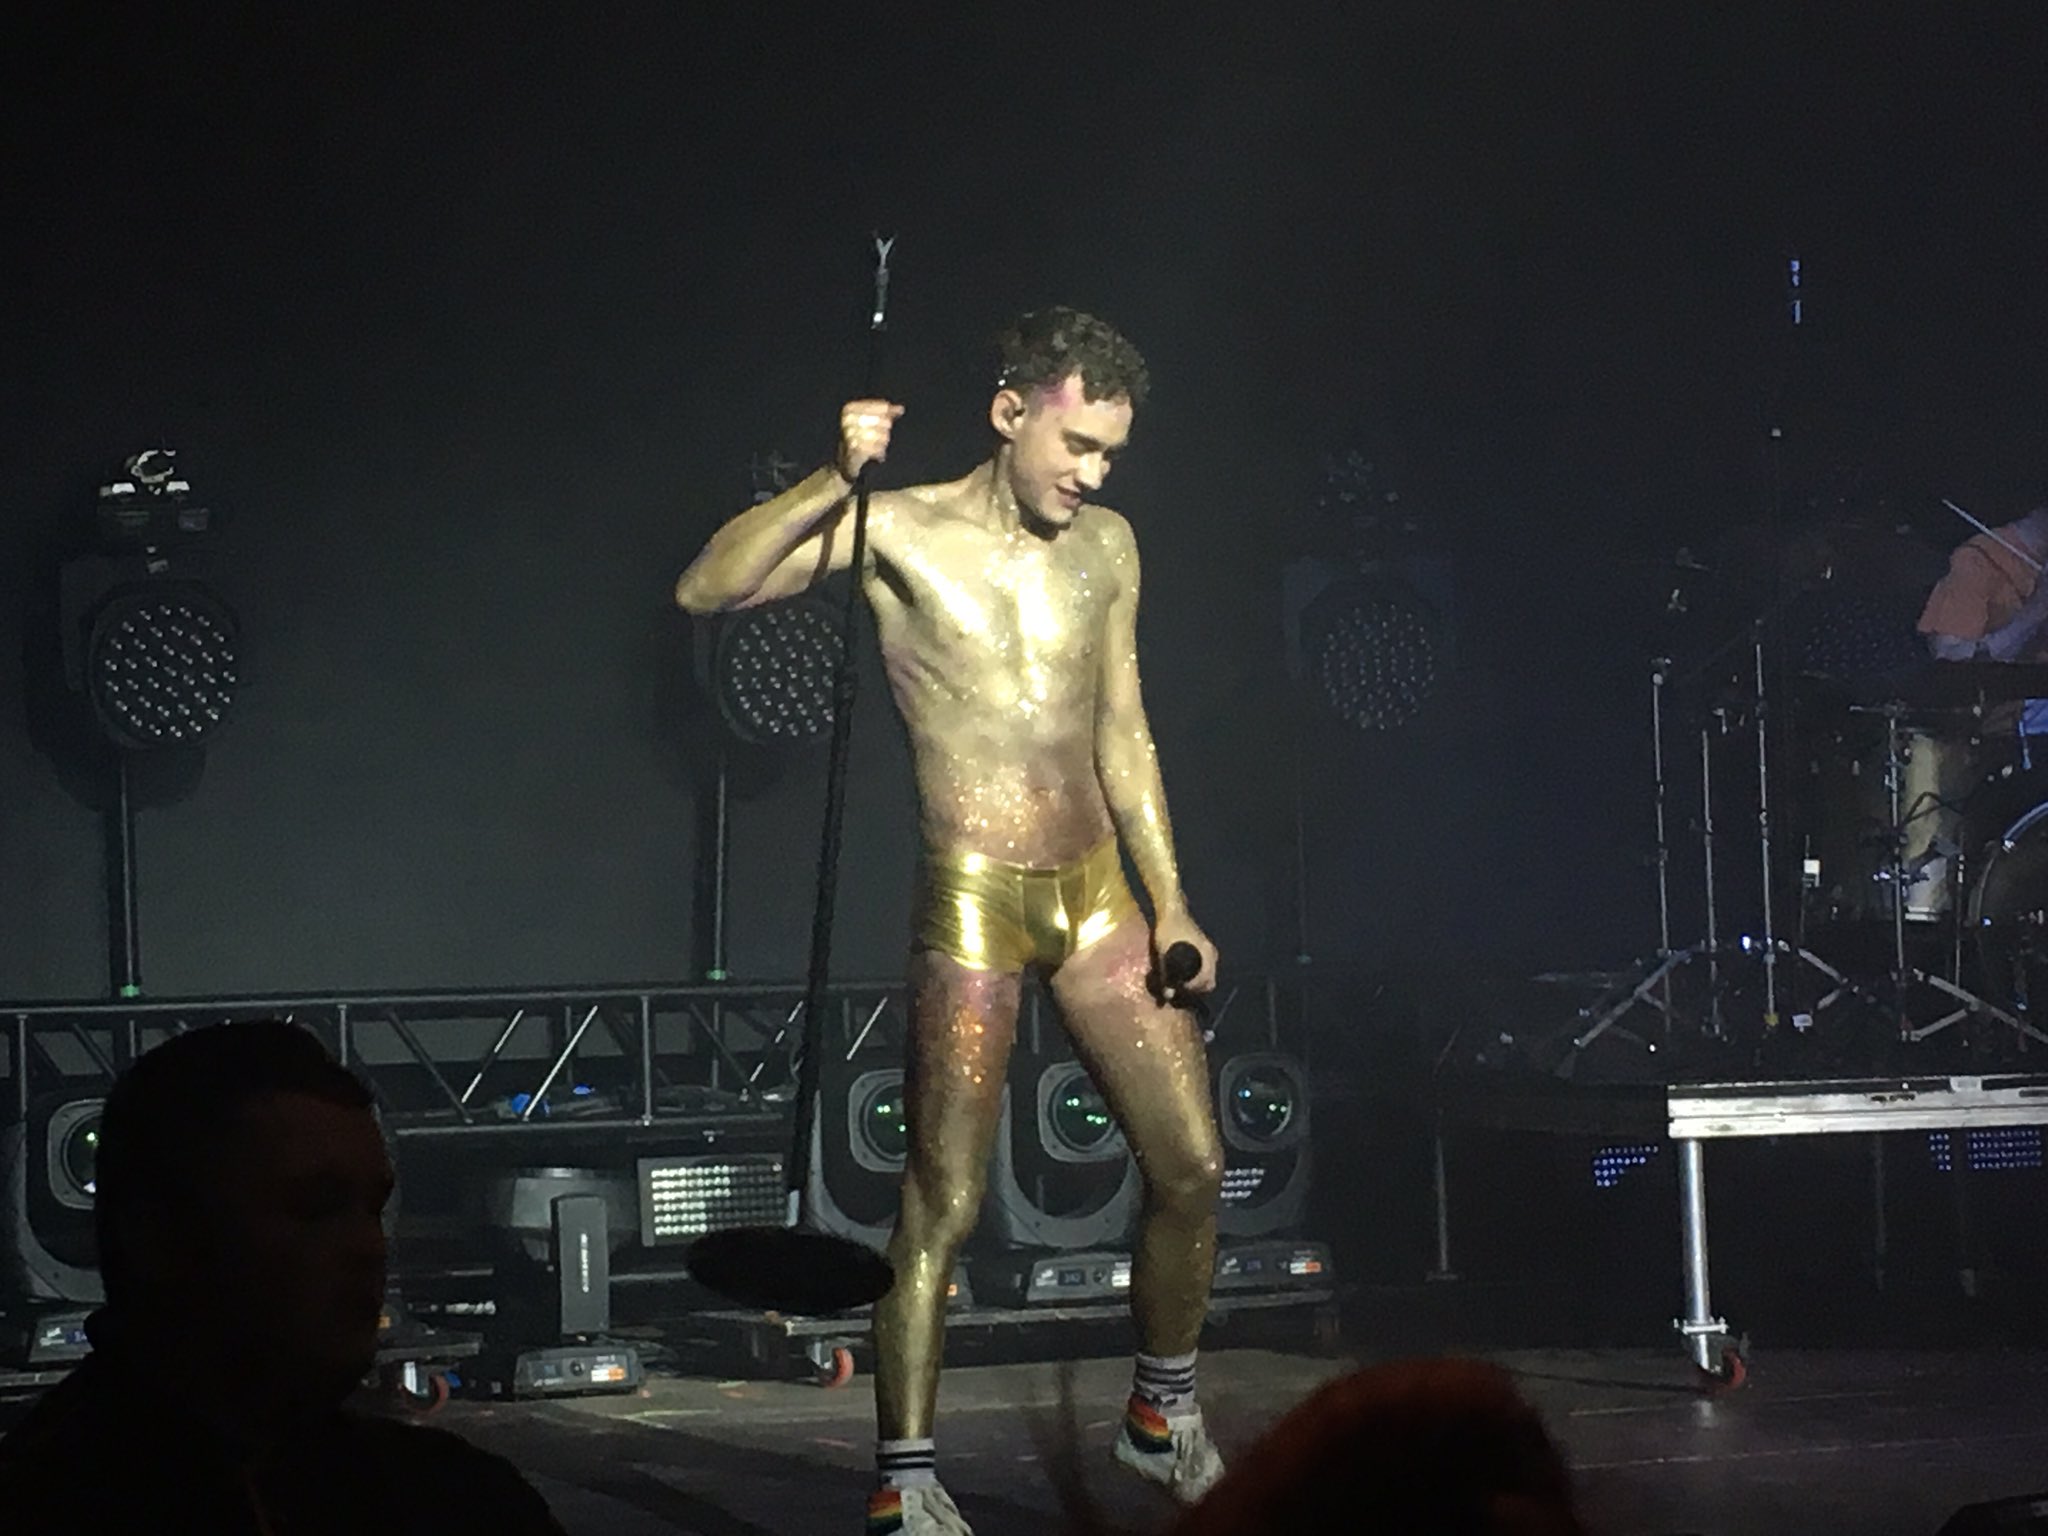 celine on Twitter: "OLLY ALEXANDER WAS NAKED AND COVERED IN GOLD GLITT...